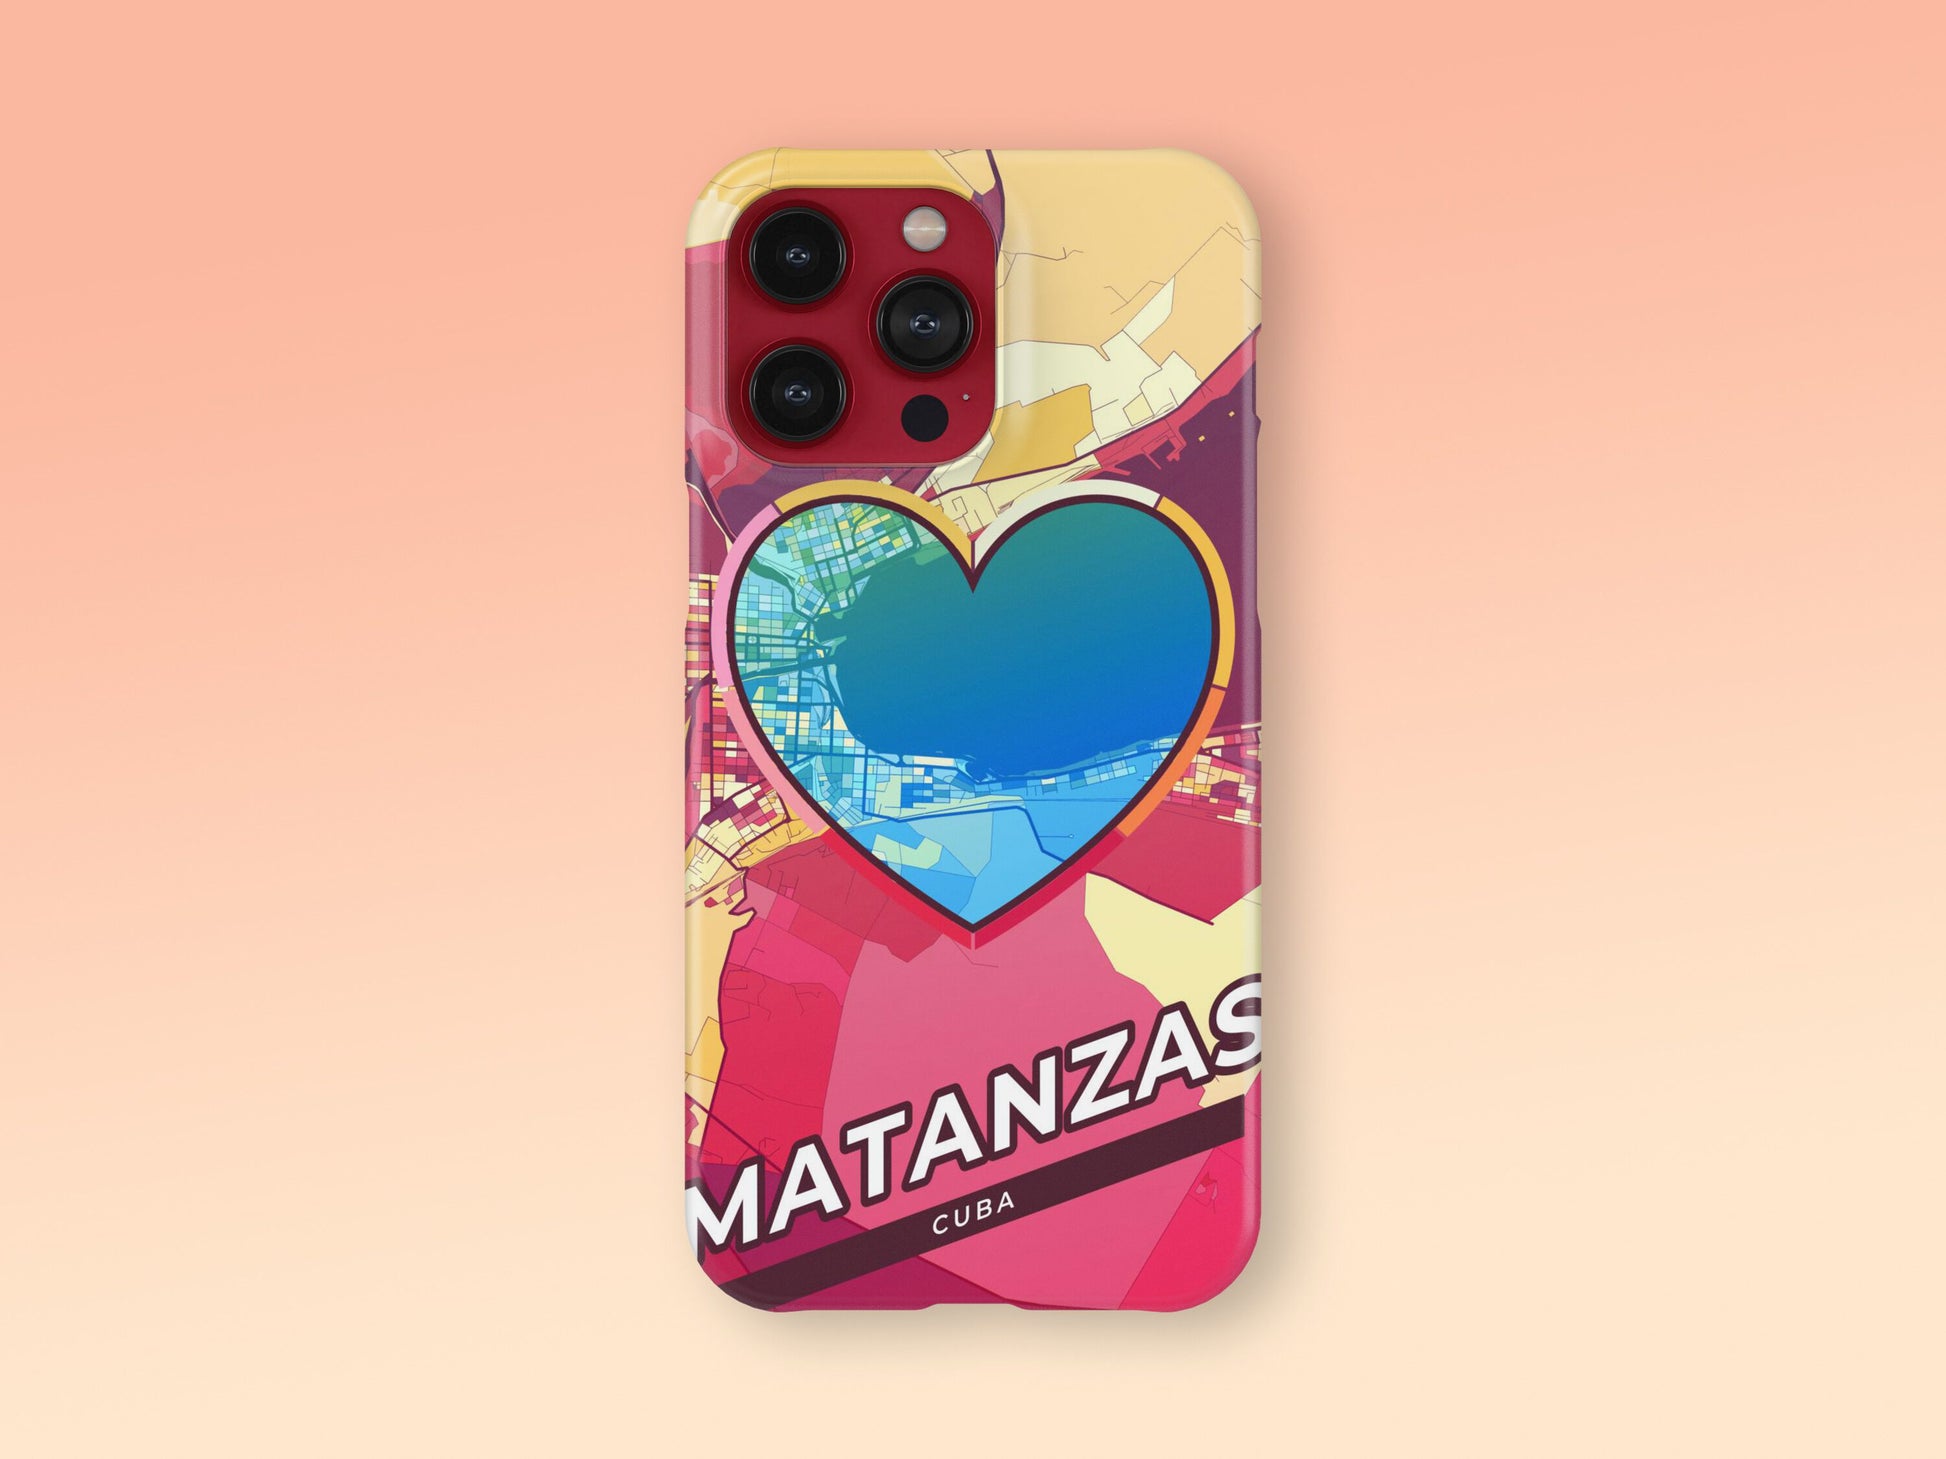 Matanzas Cuba slim phone case with colorful icon. Birthday, wedding or housewarming gift. Couple match cases. 2